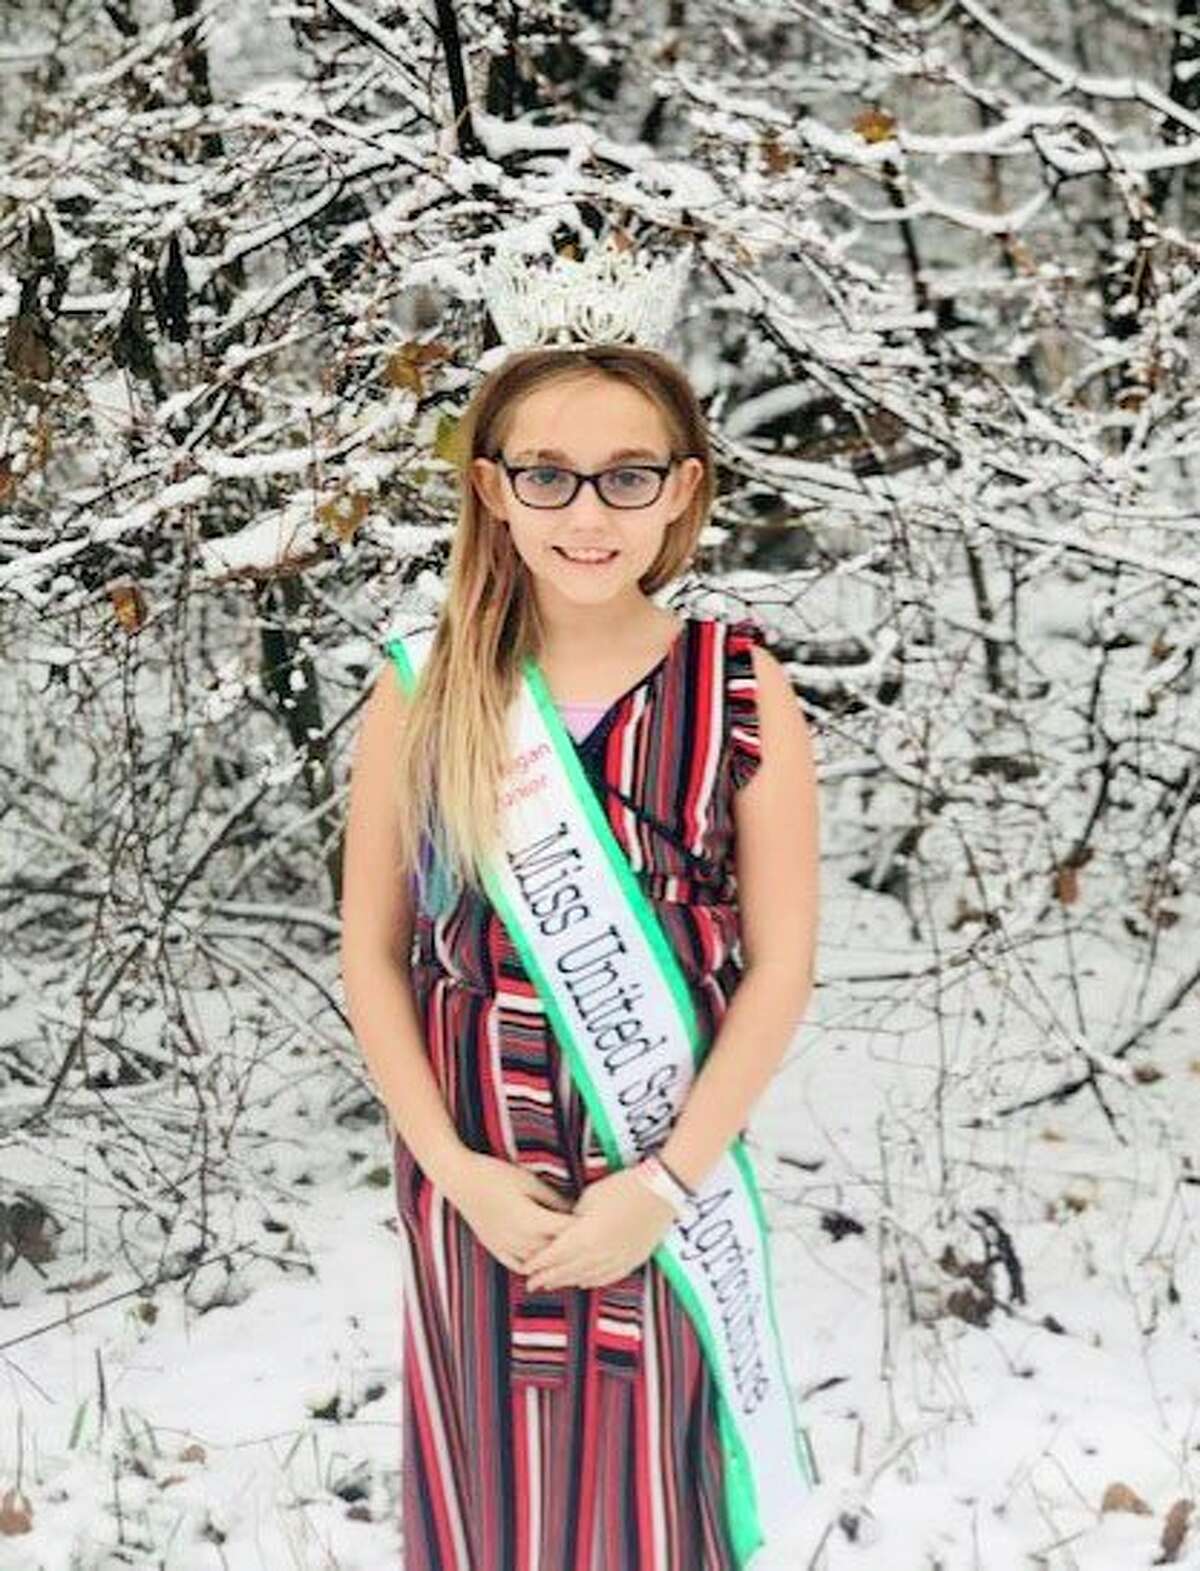 Jazmine Davis recently was named Michigan Miss Junior U.S. Agriculture. She will be representing the state at the national level in June. (Courtesy photo)